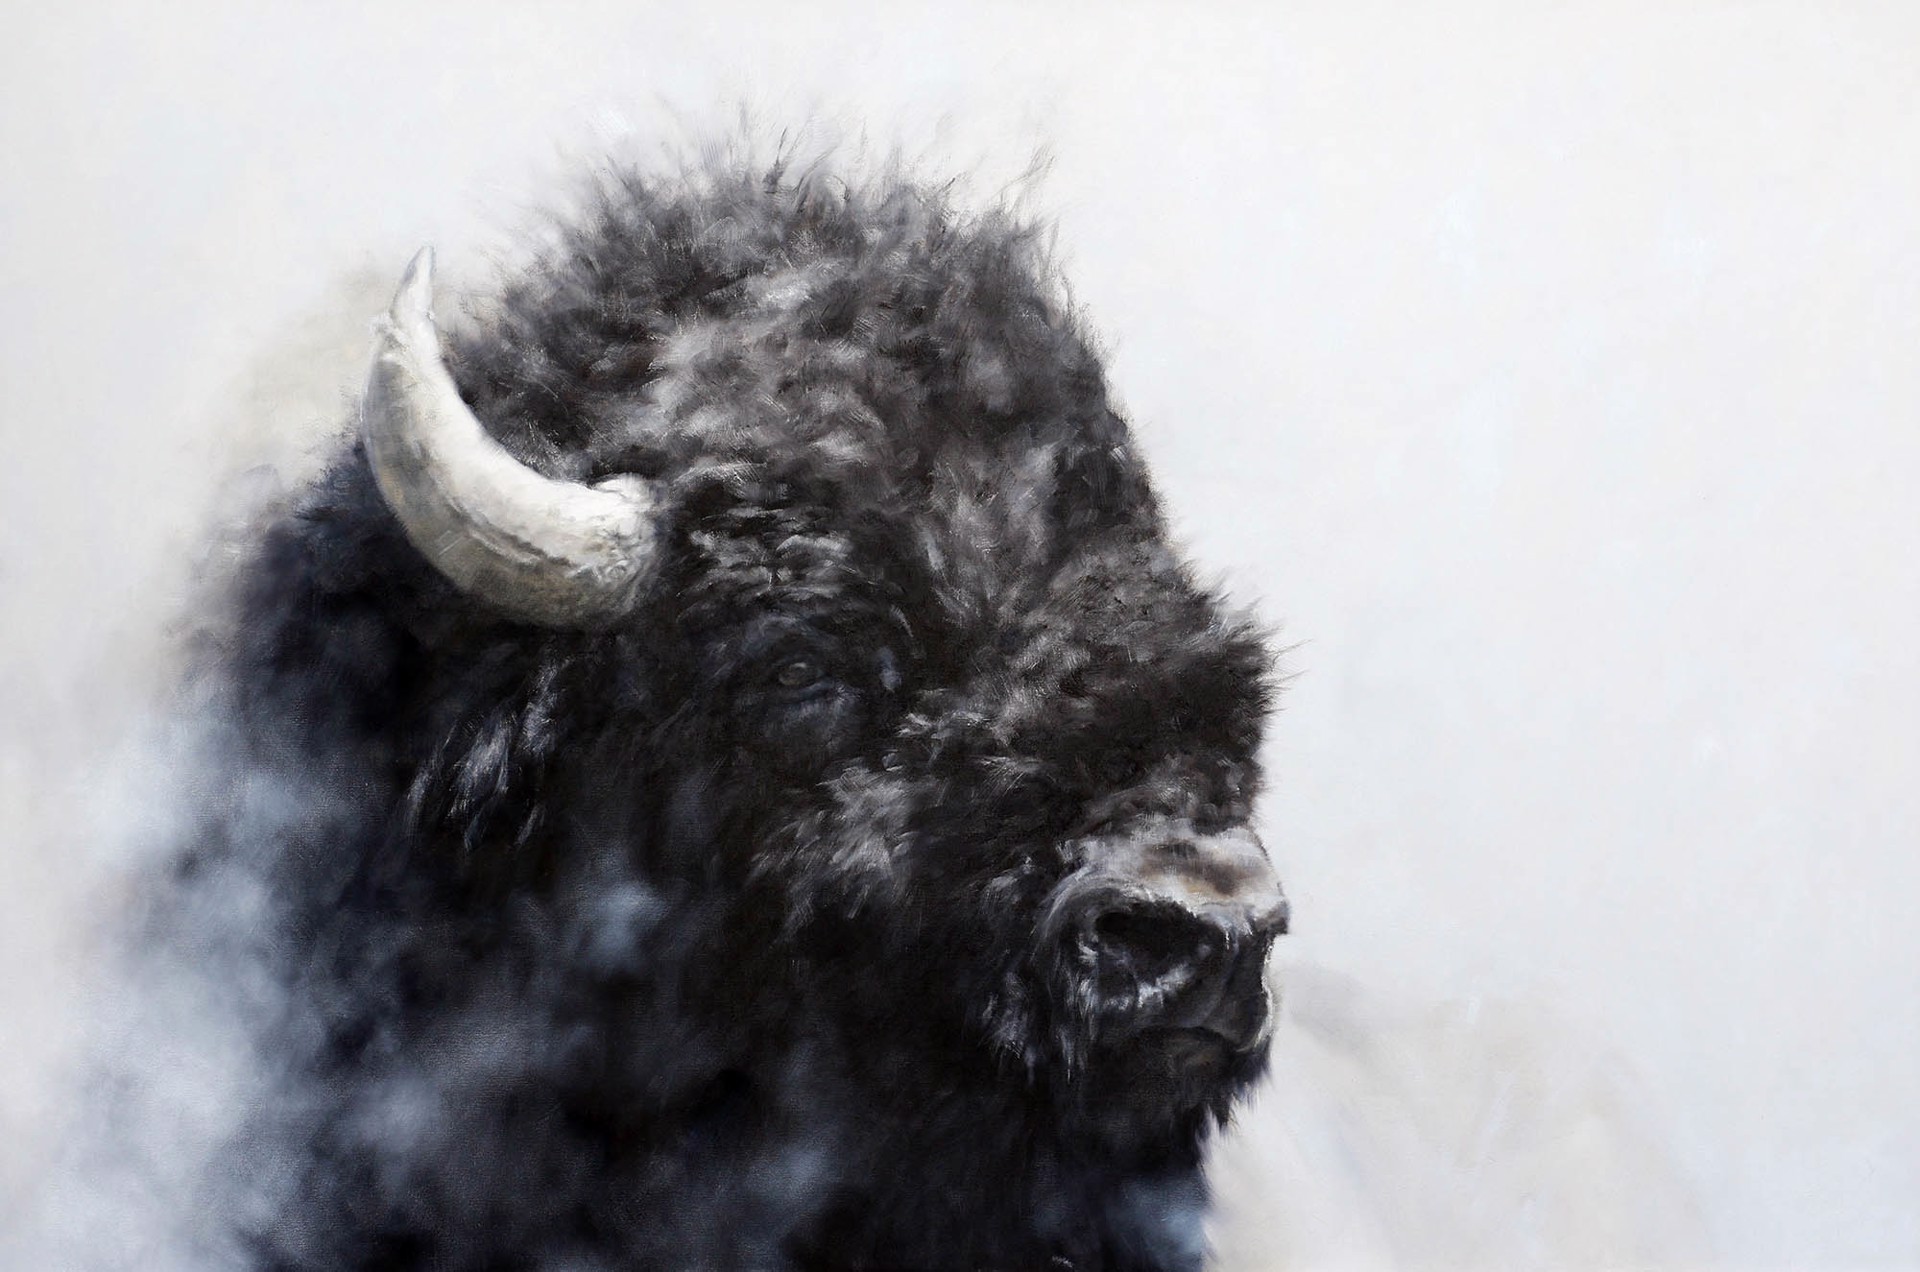 Original Oil Painting Featuring A Bison Head Fading Into White Snowy Background